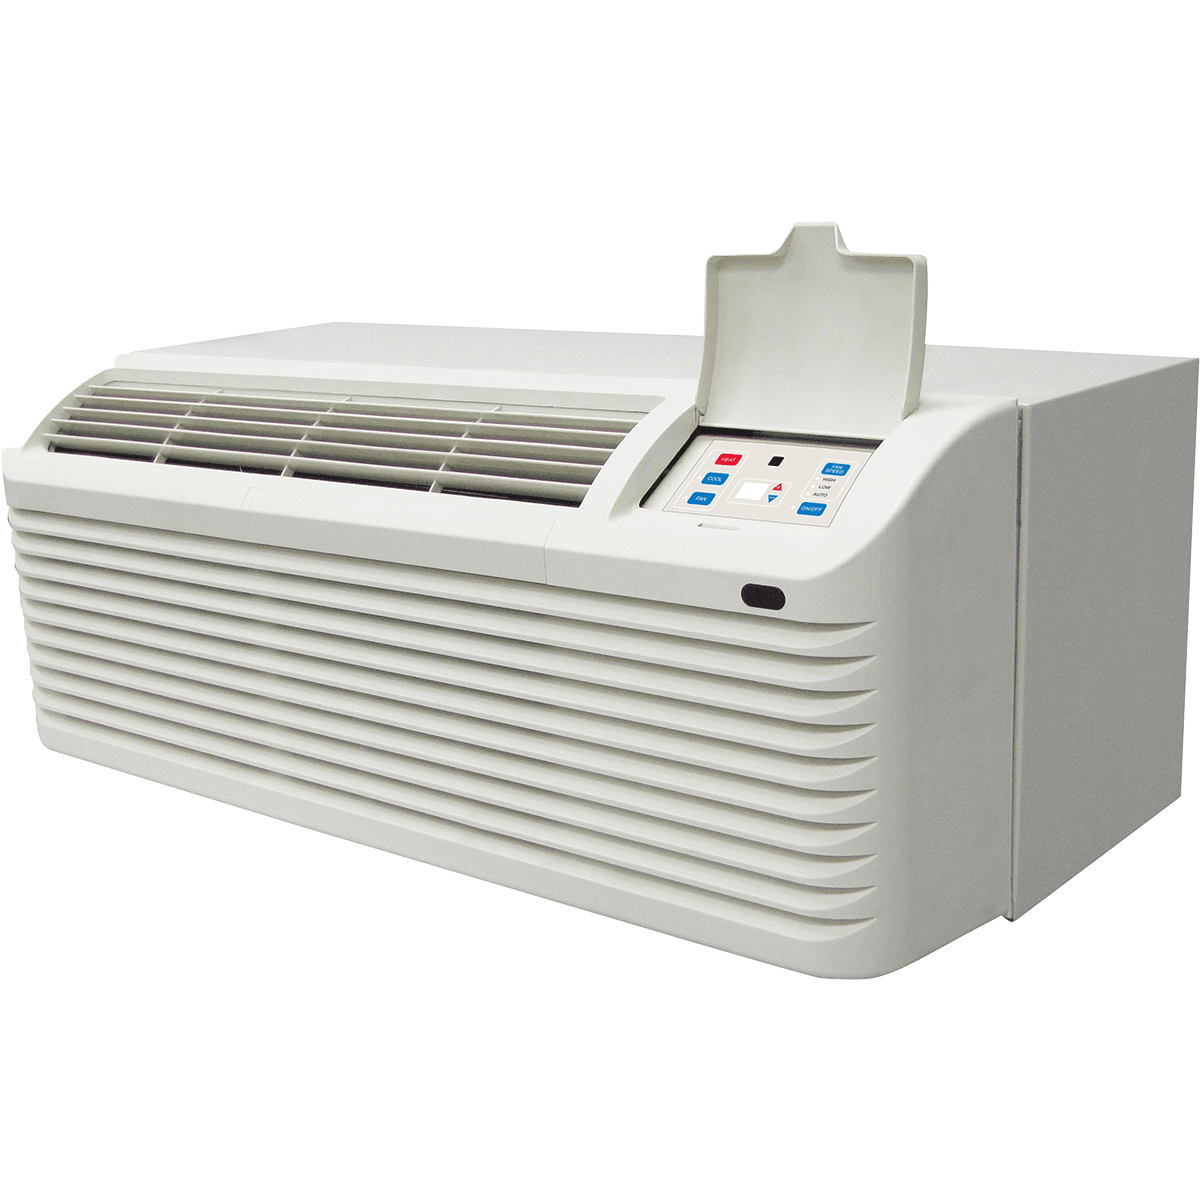 Comfort-aire 7,000 Btu Packaged Terminal Air Conditioner And Heater